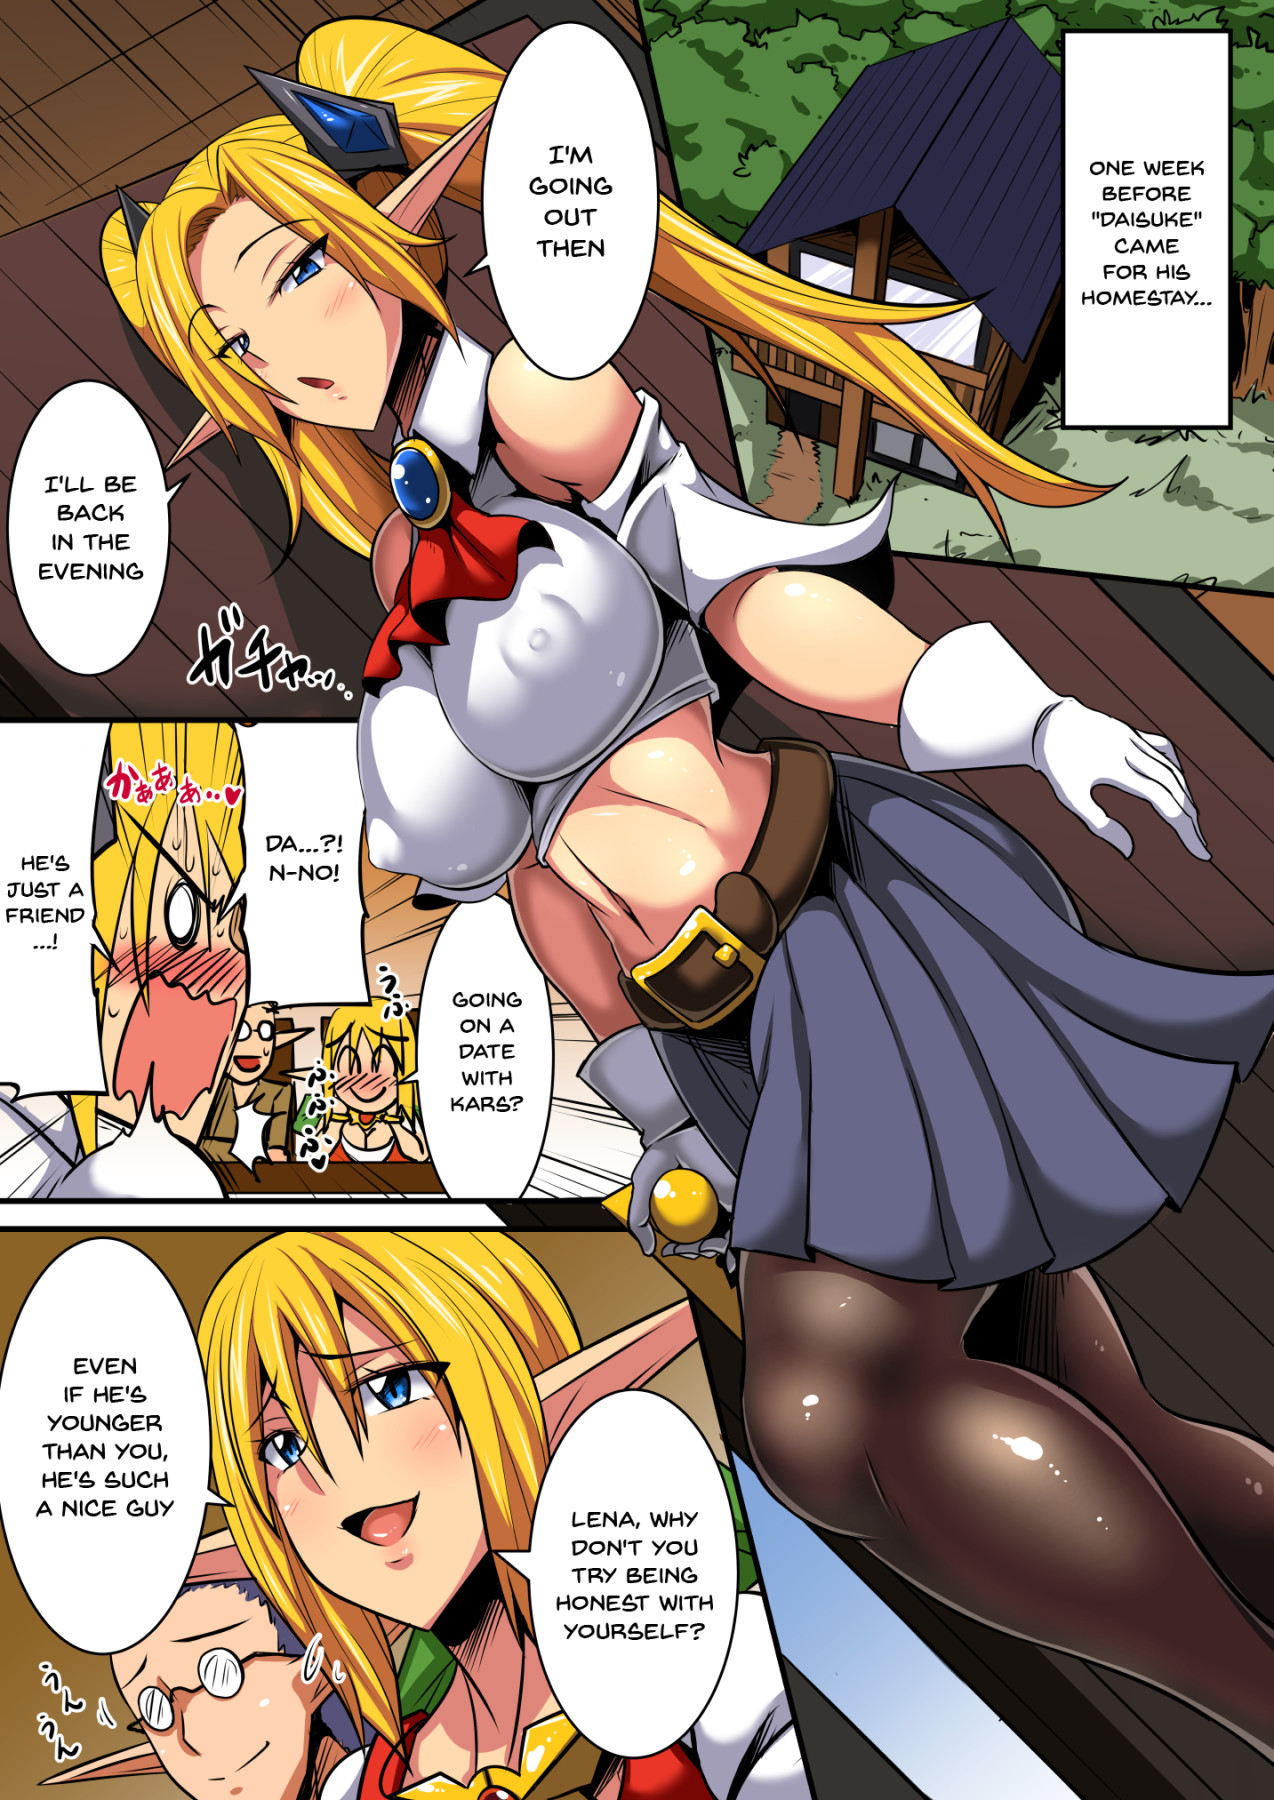 Hentai Manga Comic-Having a Culture Exchange With an Elf Mother and Daughter ~Lena Edition~-Read-2